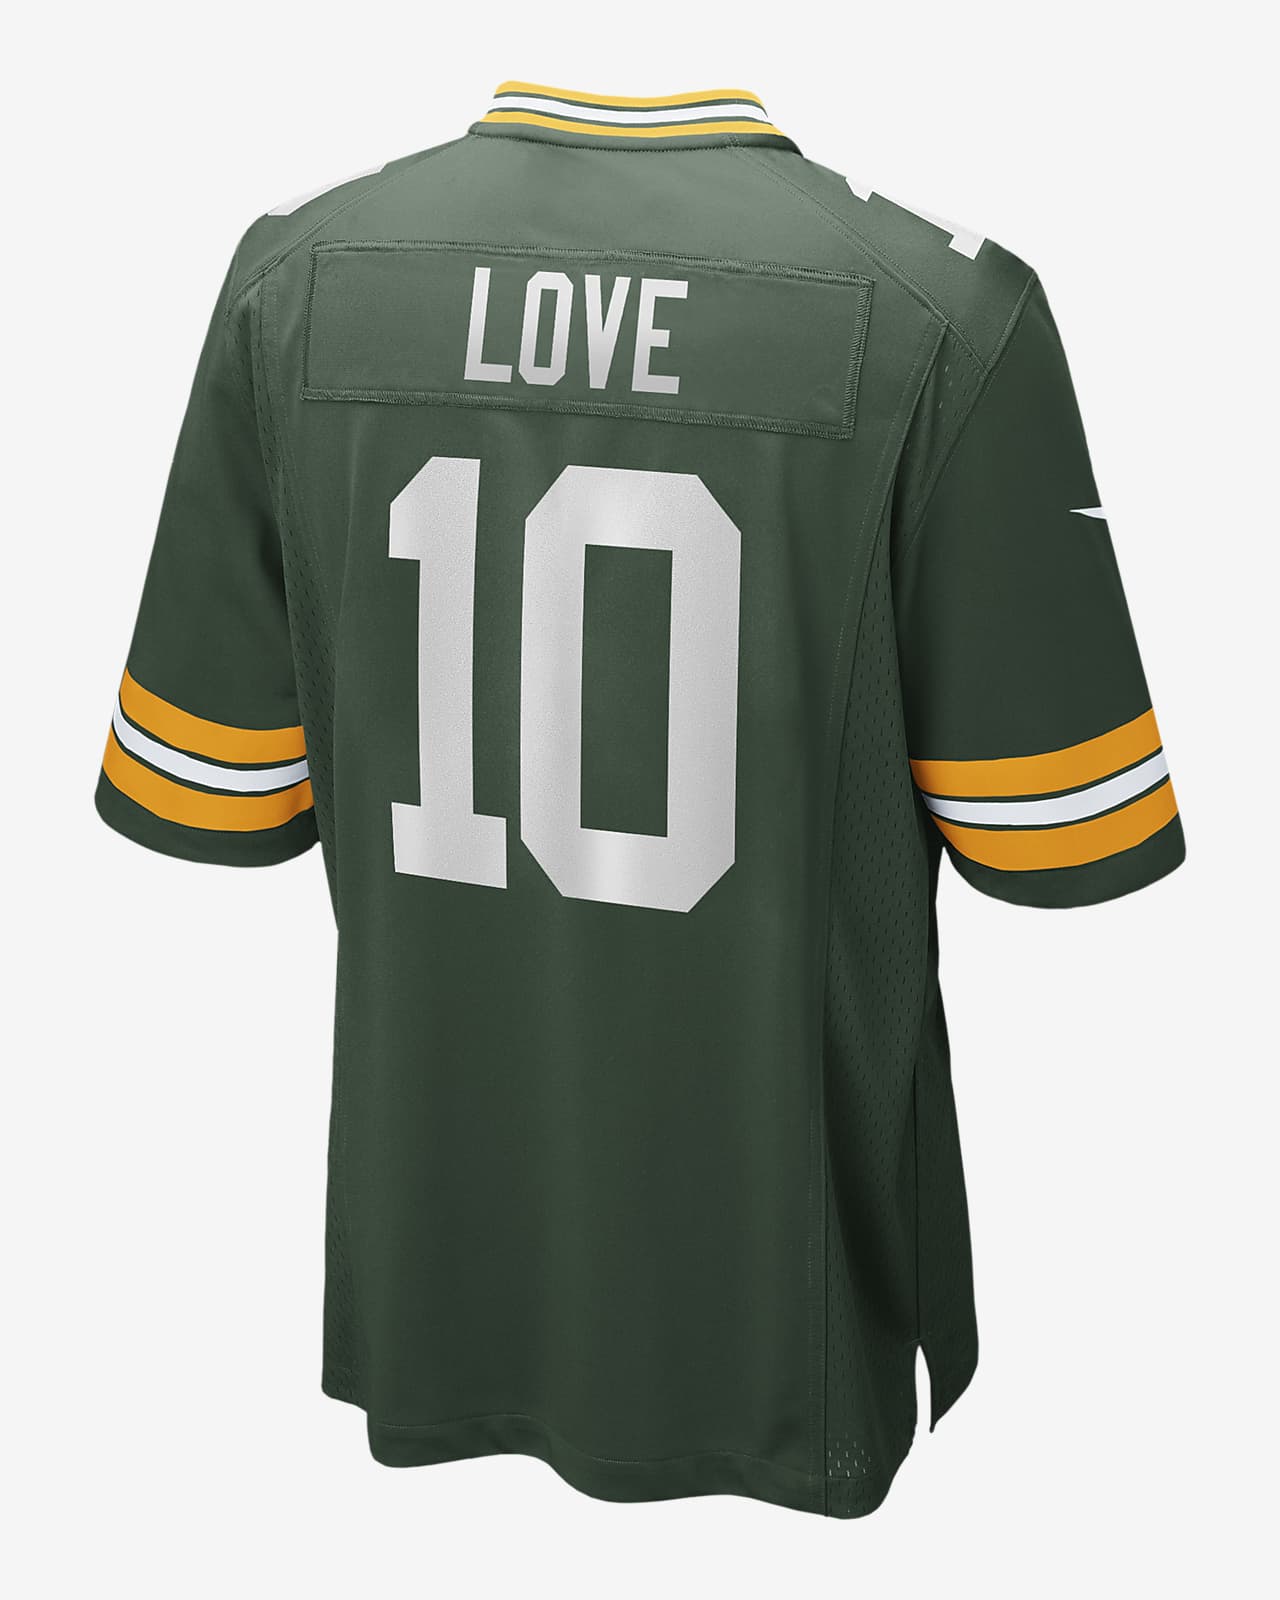 green bay packers practice jersey